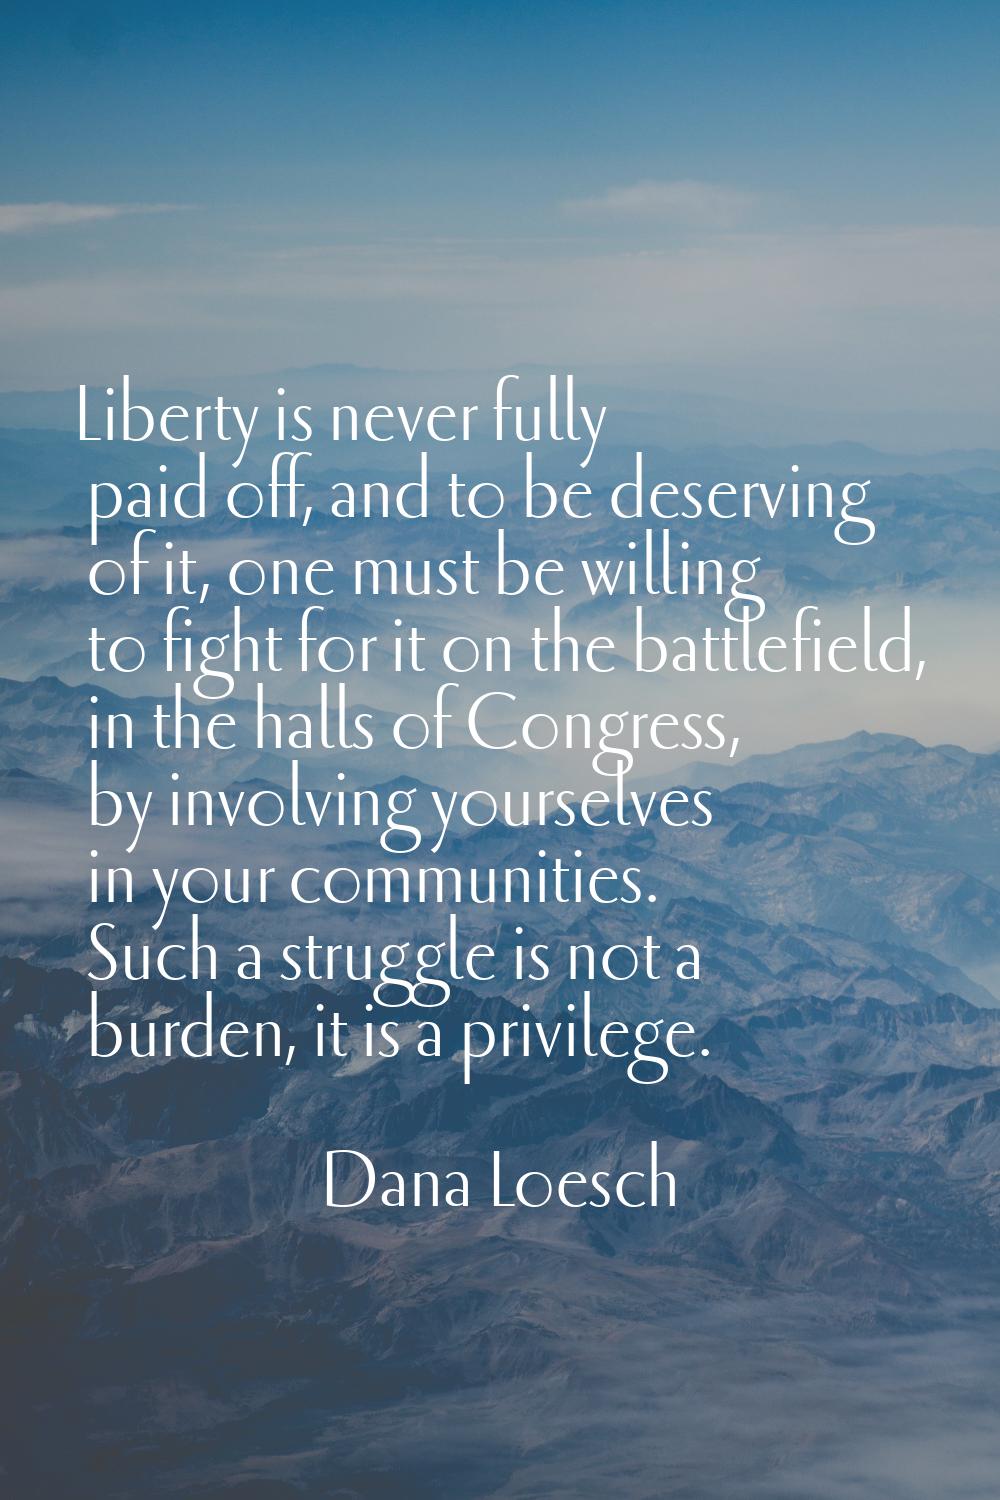 Liberty is never fully paid off, and to be deserving of it, one must be willing to fight for it on 